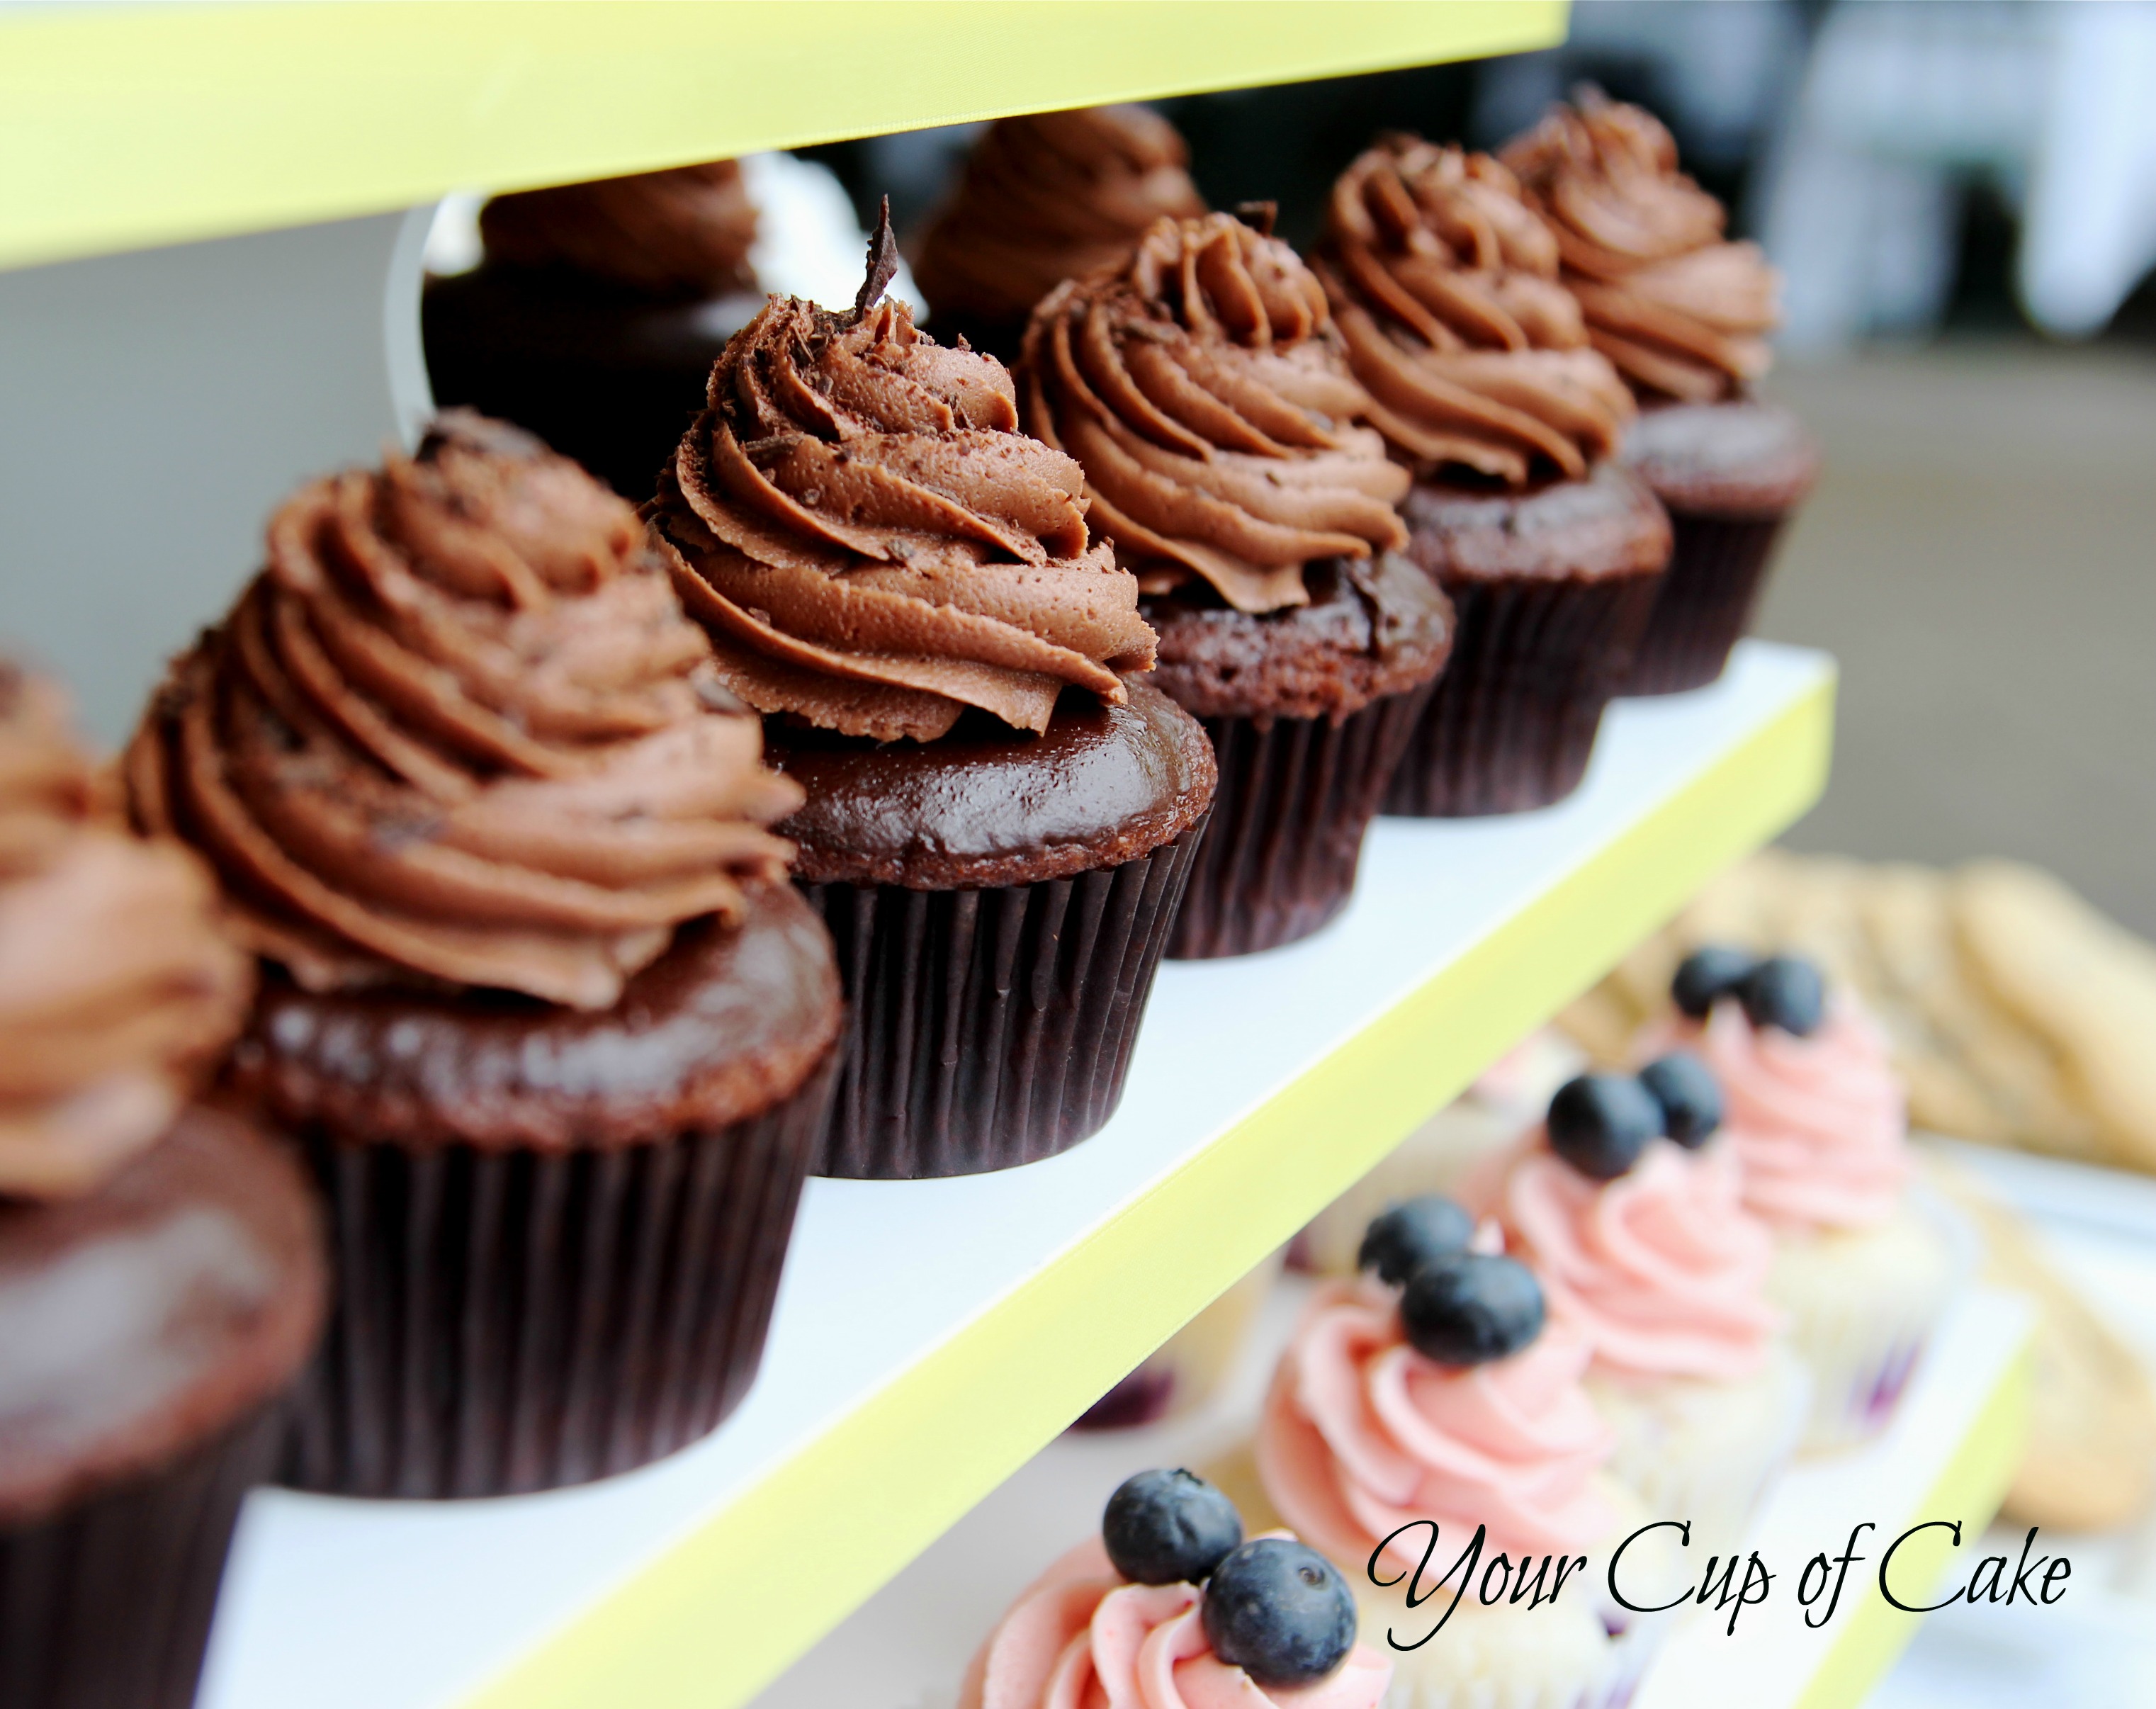 My Favorite Chocolate Cupcake - Your Cup of Cake